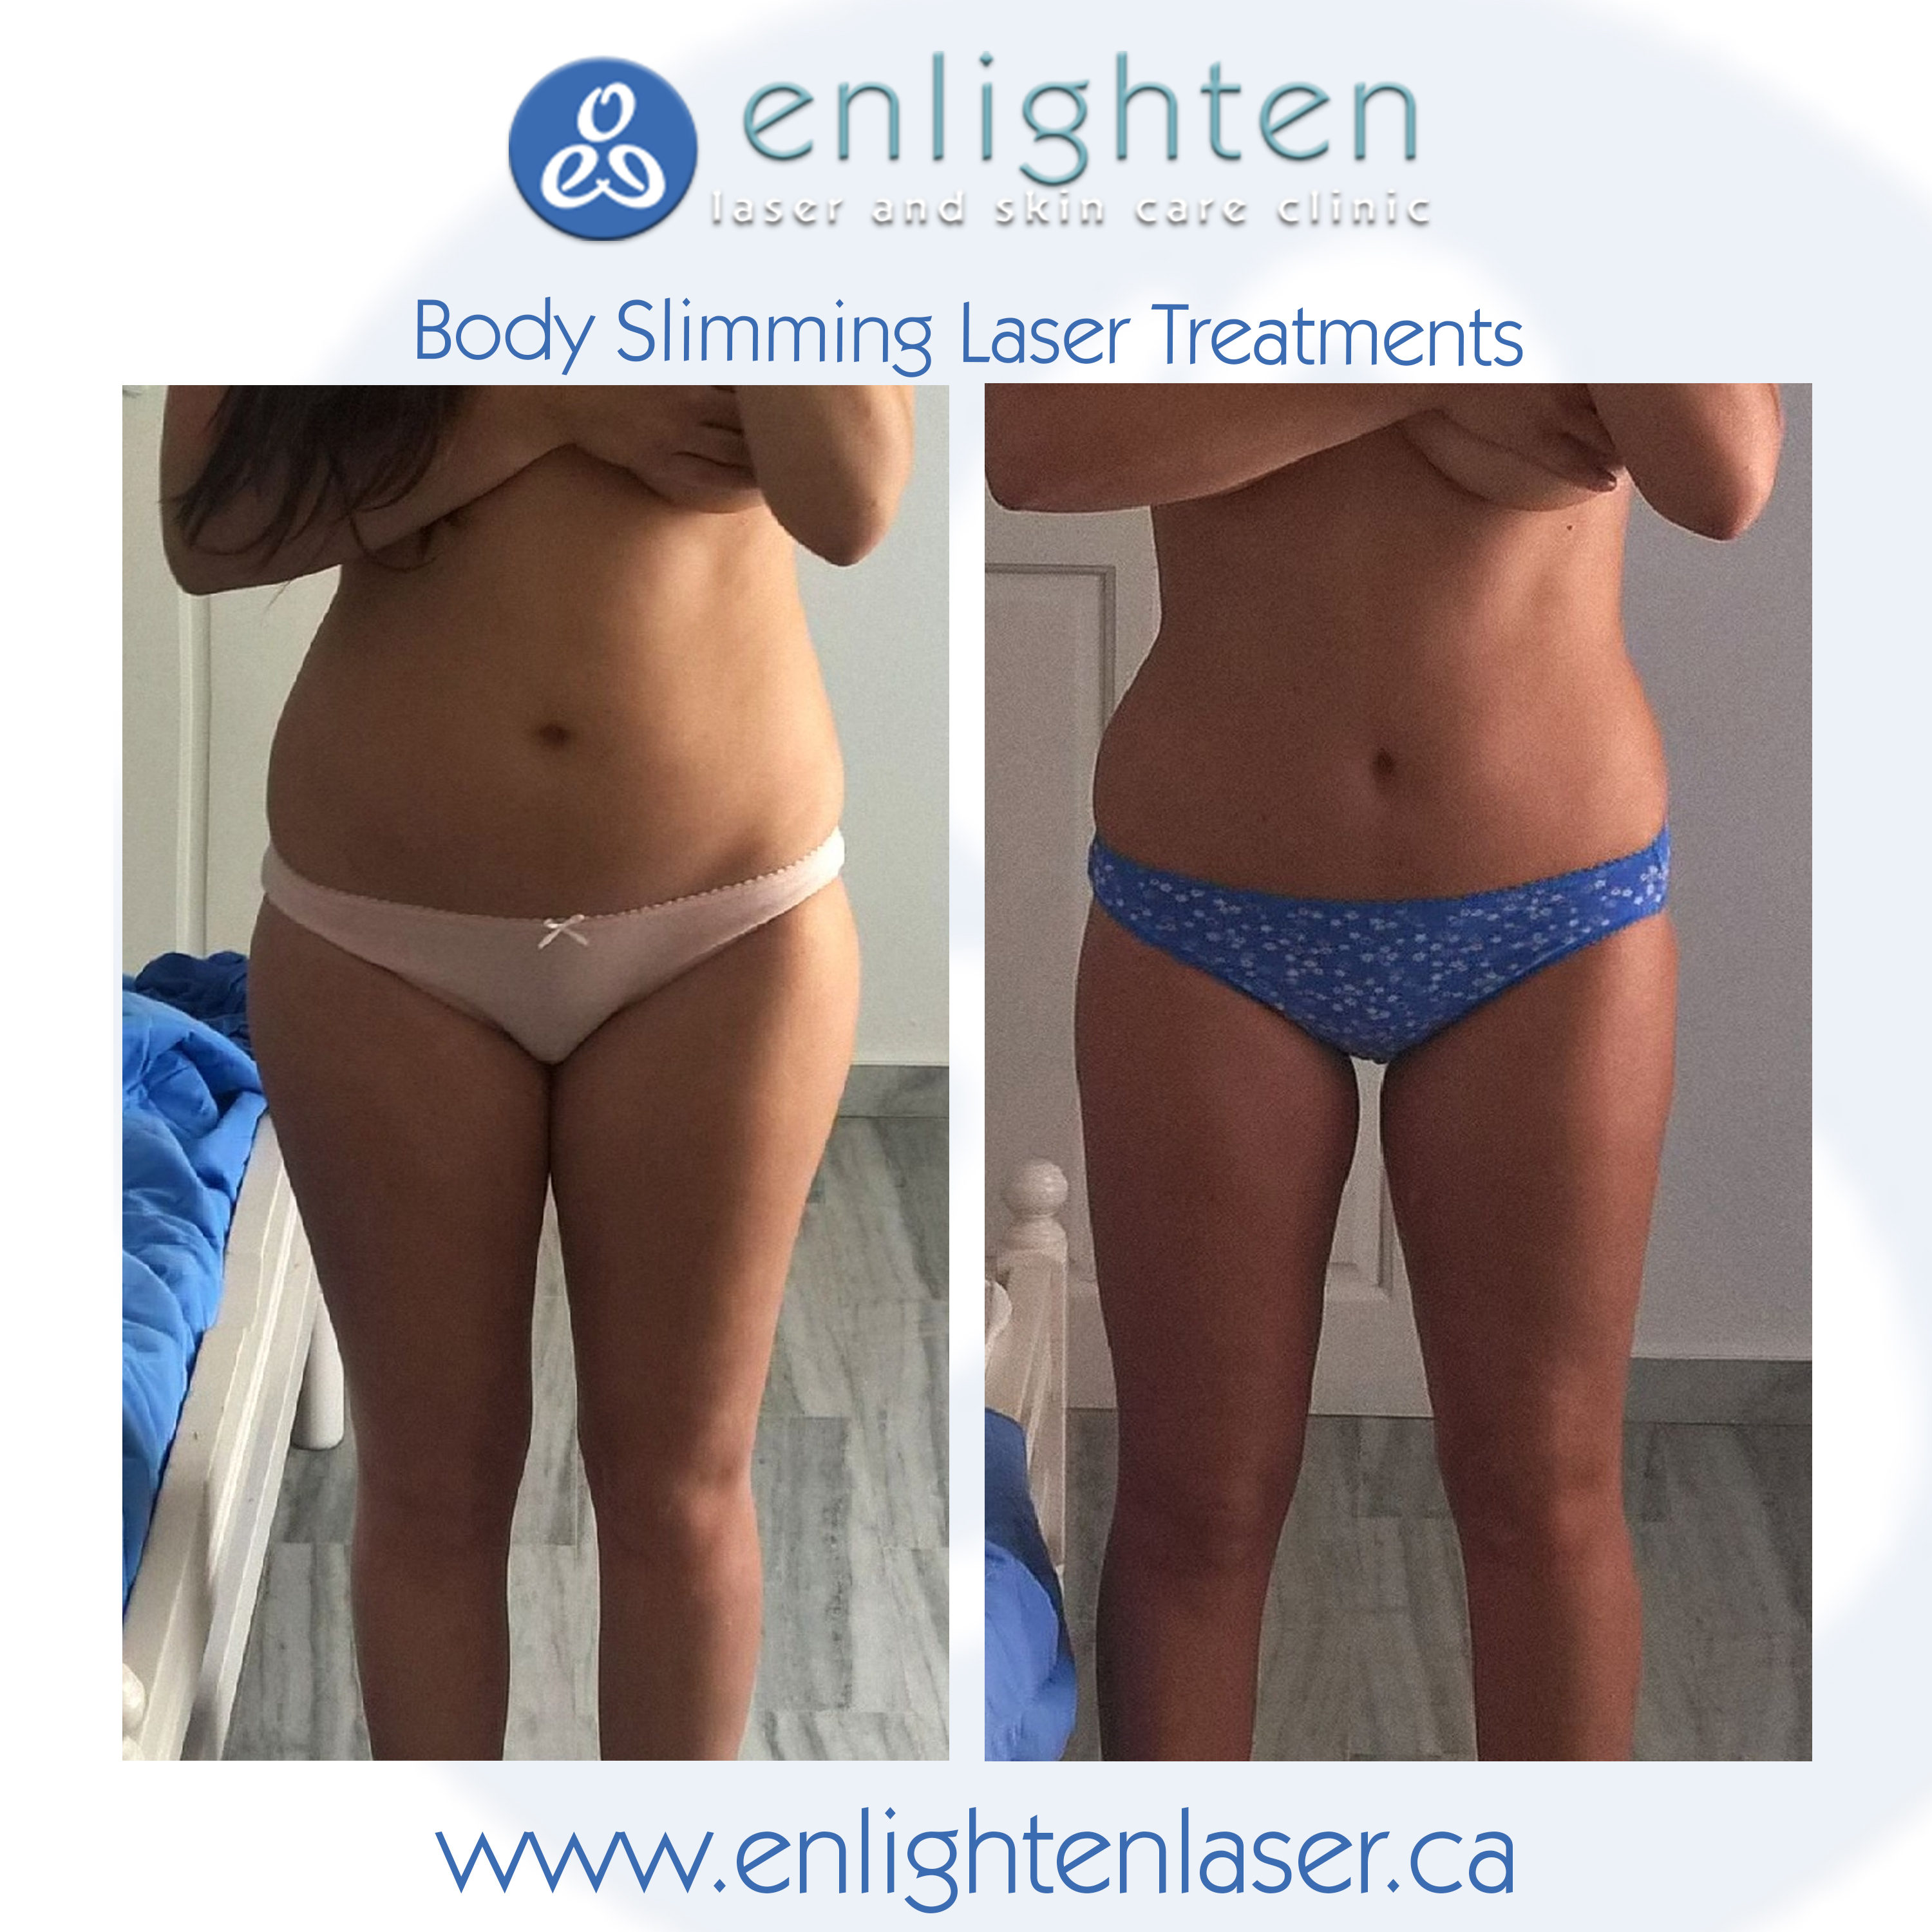 Body Slimming: What is it anyway?  Enlighten Laser and Skin Care Clinic